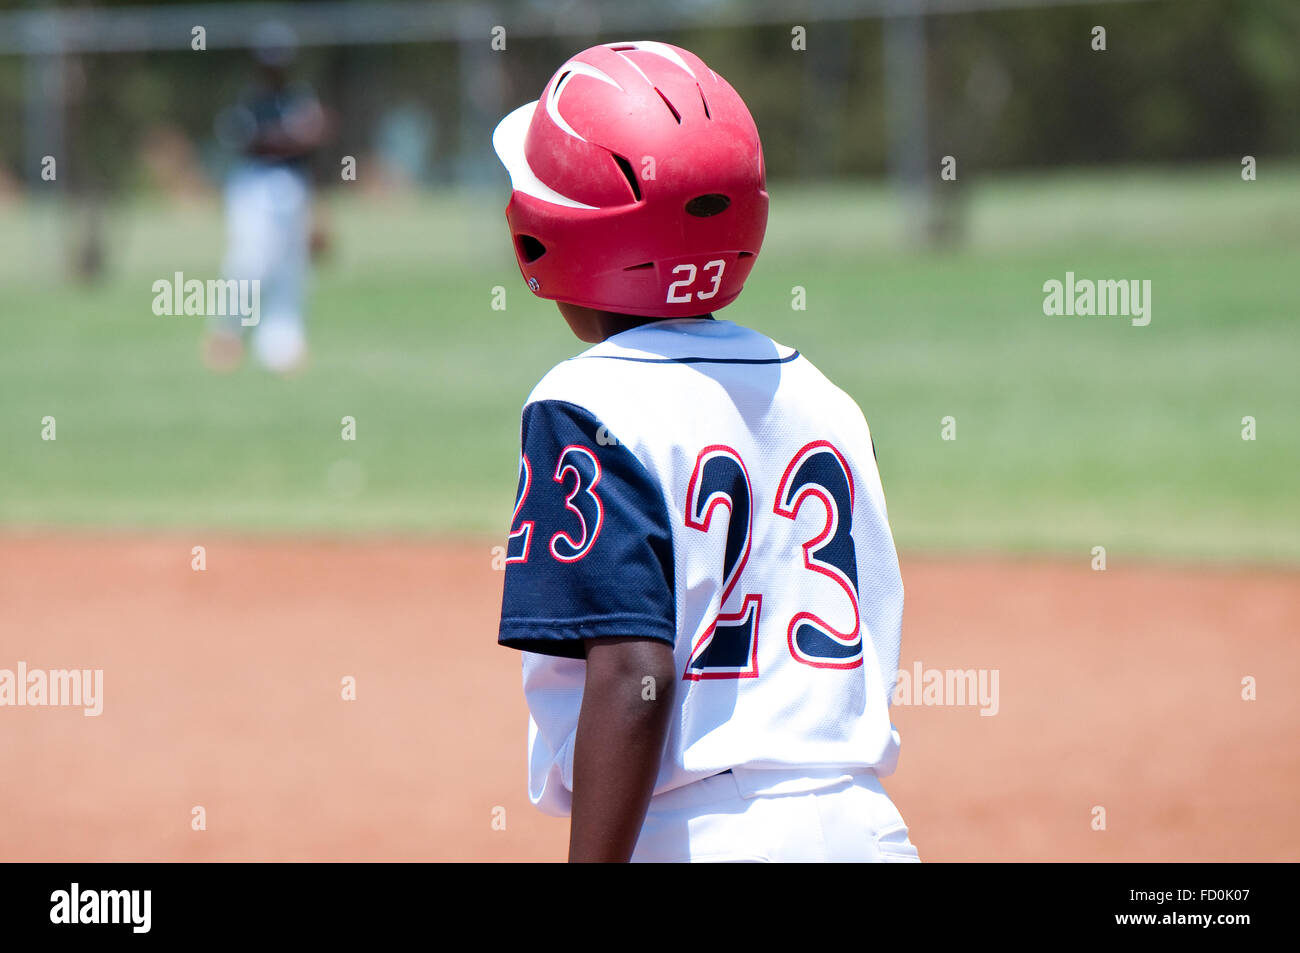 Youth baseball player wearing red helmet standing on first base. Stock Photo